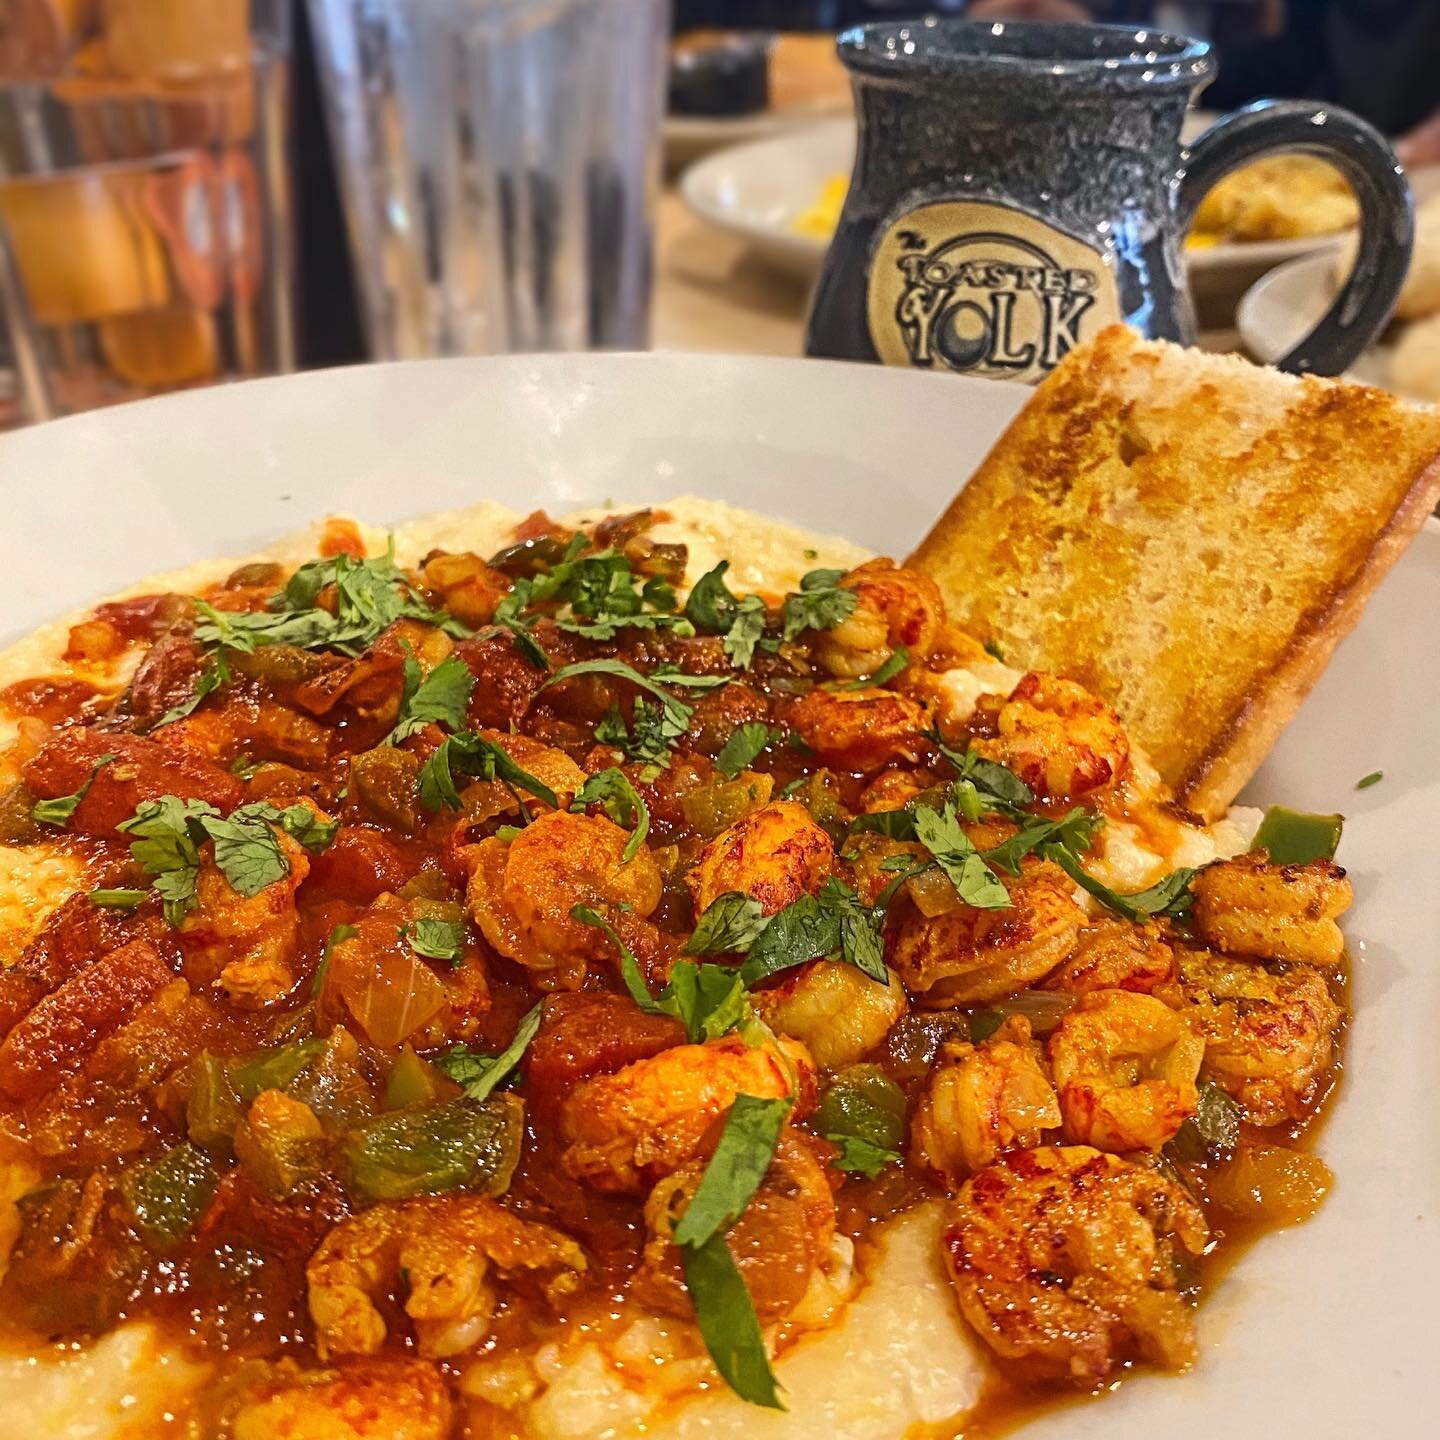 We filed this under &quot;breakfasts we could have every day &quot;🤯😍
.
.
On the plate: &quot;Tails and Grits&quot; crawfish and spicy Creole sauce.
.
.
.
#thetoastedyolk #breakfast #brunch #crawfish #grits #goodfoodgurus #gfg #foodiesofinstagram #